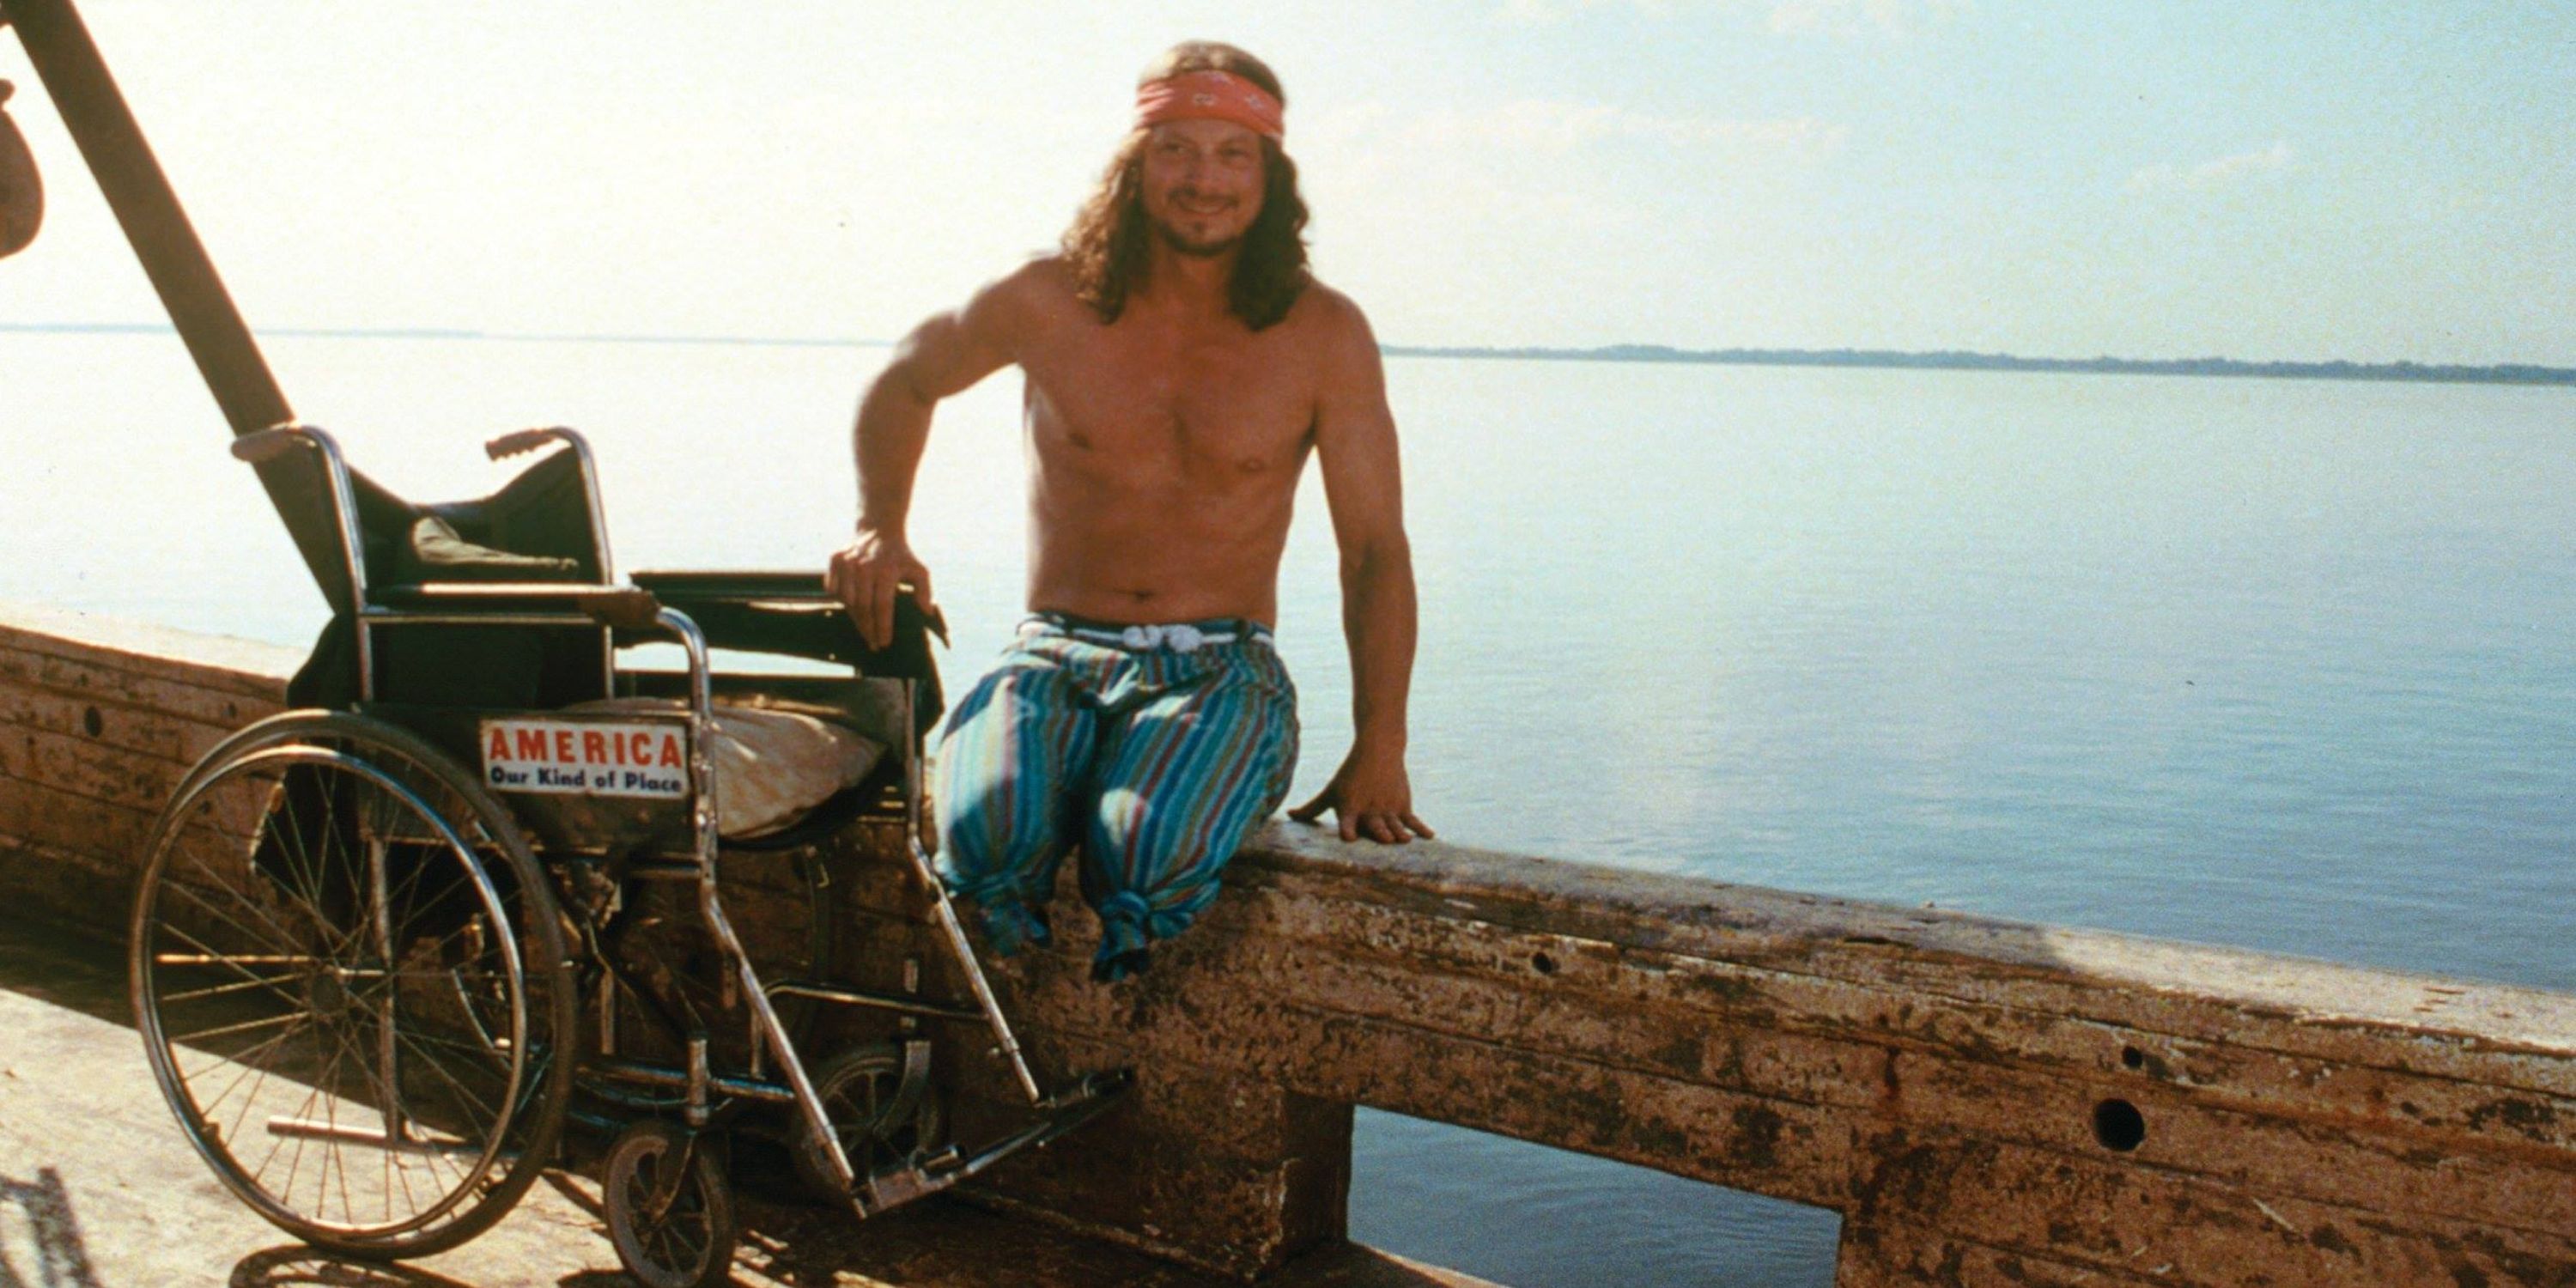 Gary Sinise as First Mate Lieutenant Dan on the boat out of his wheelchair in Forrest Gump